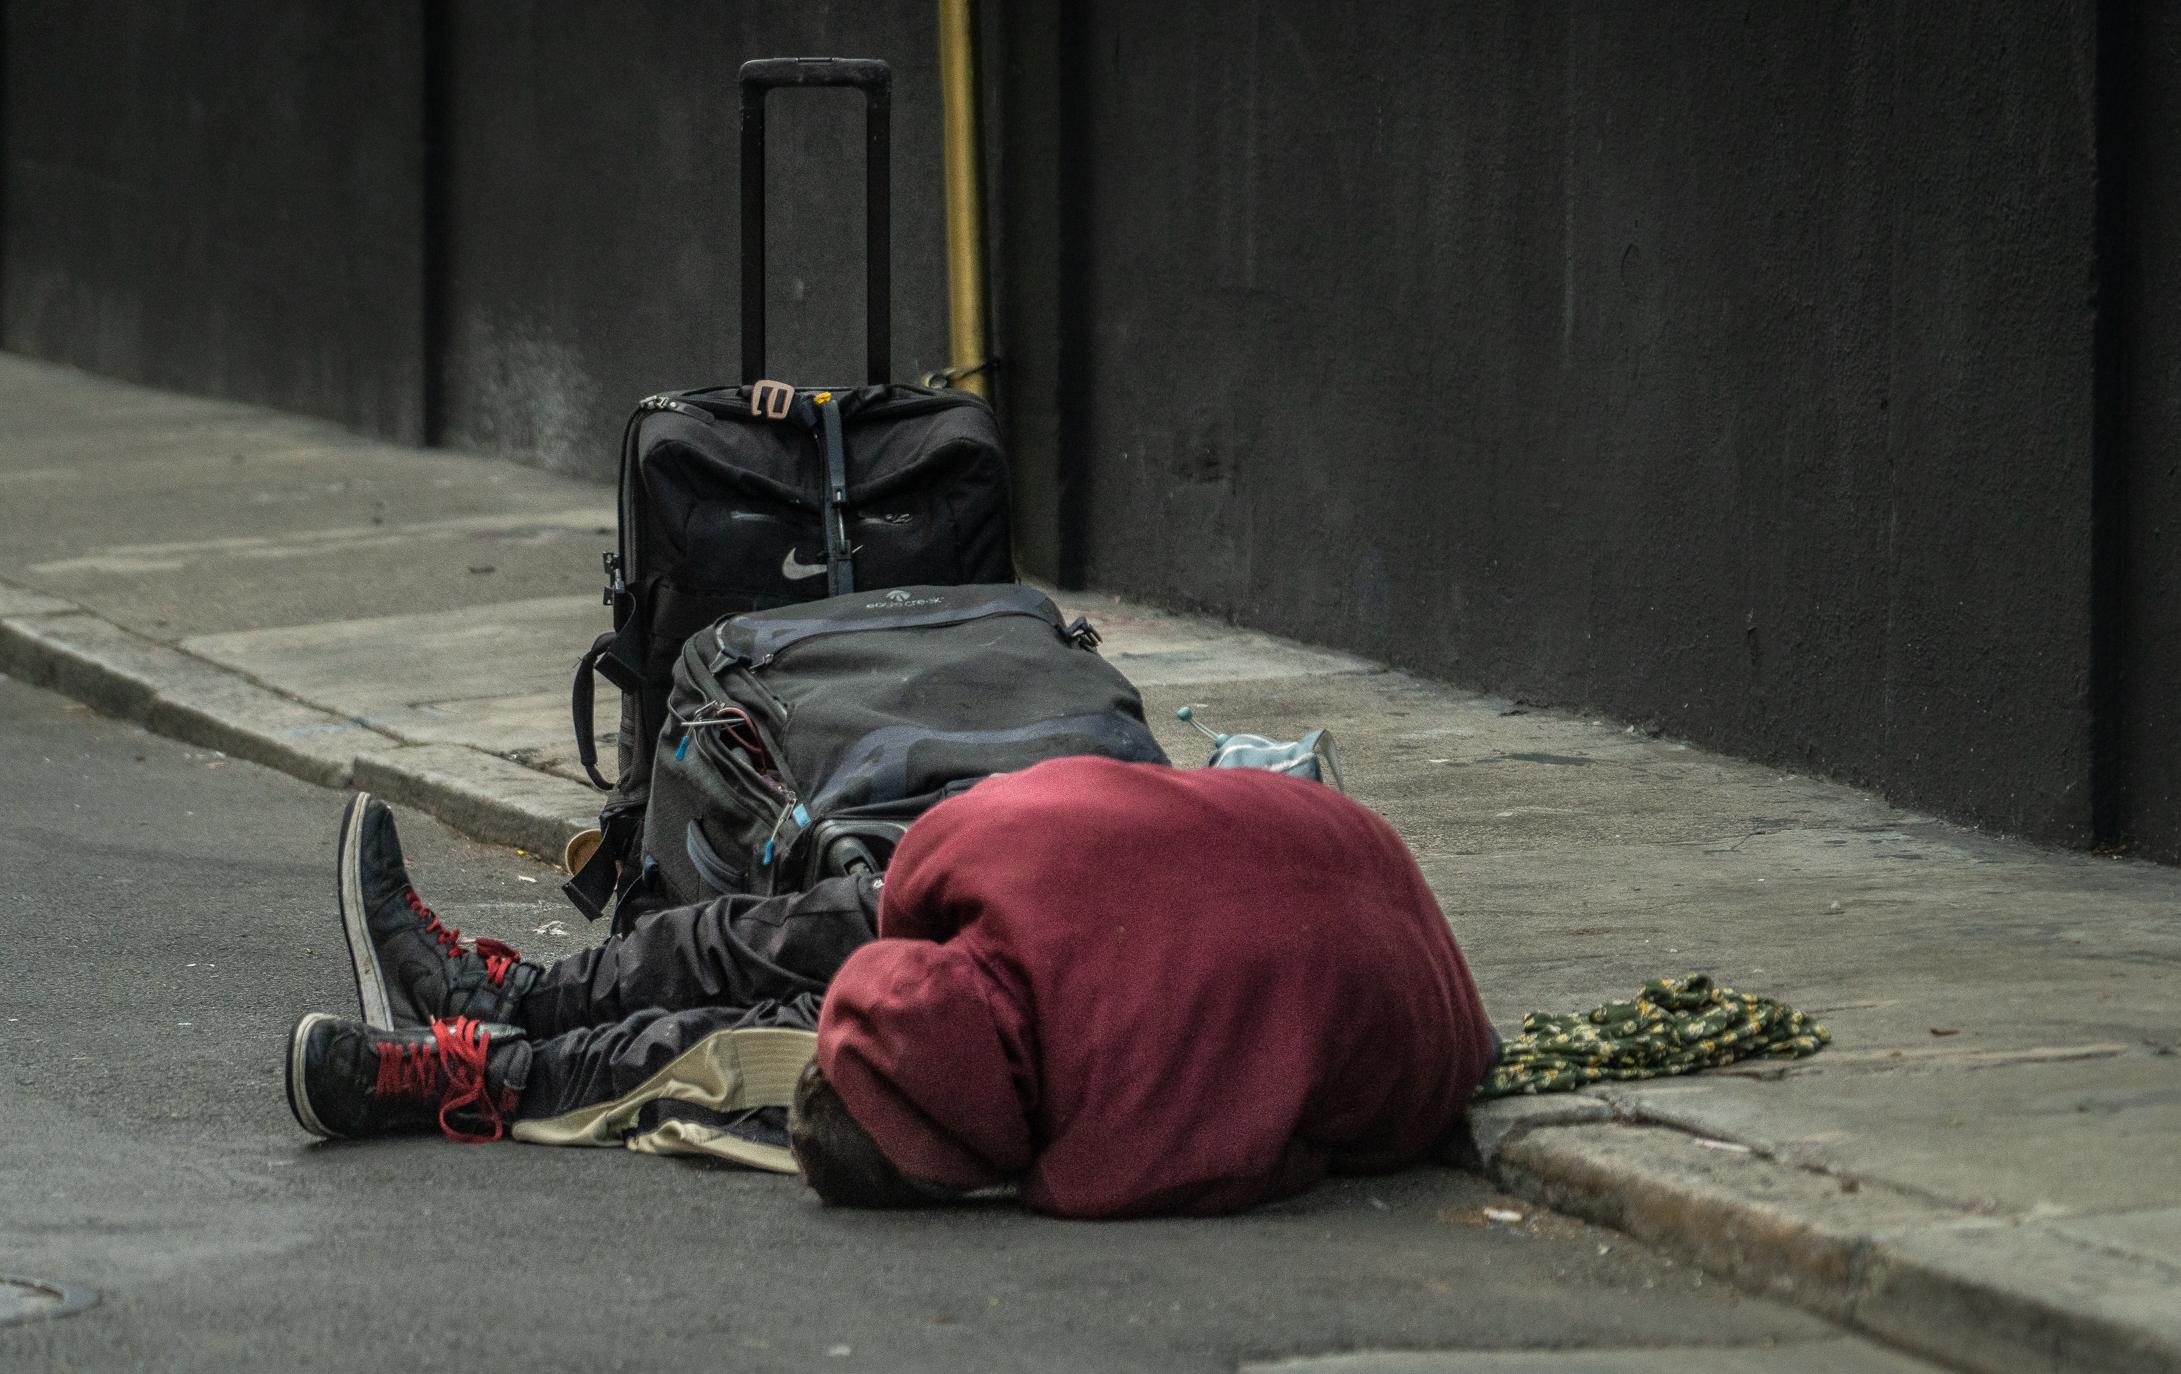 Sudden Death Rate 16 Times Higher in San Francisco’s Homeless Than Housed Residents: Study